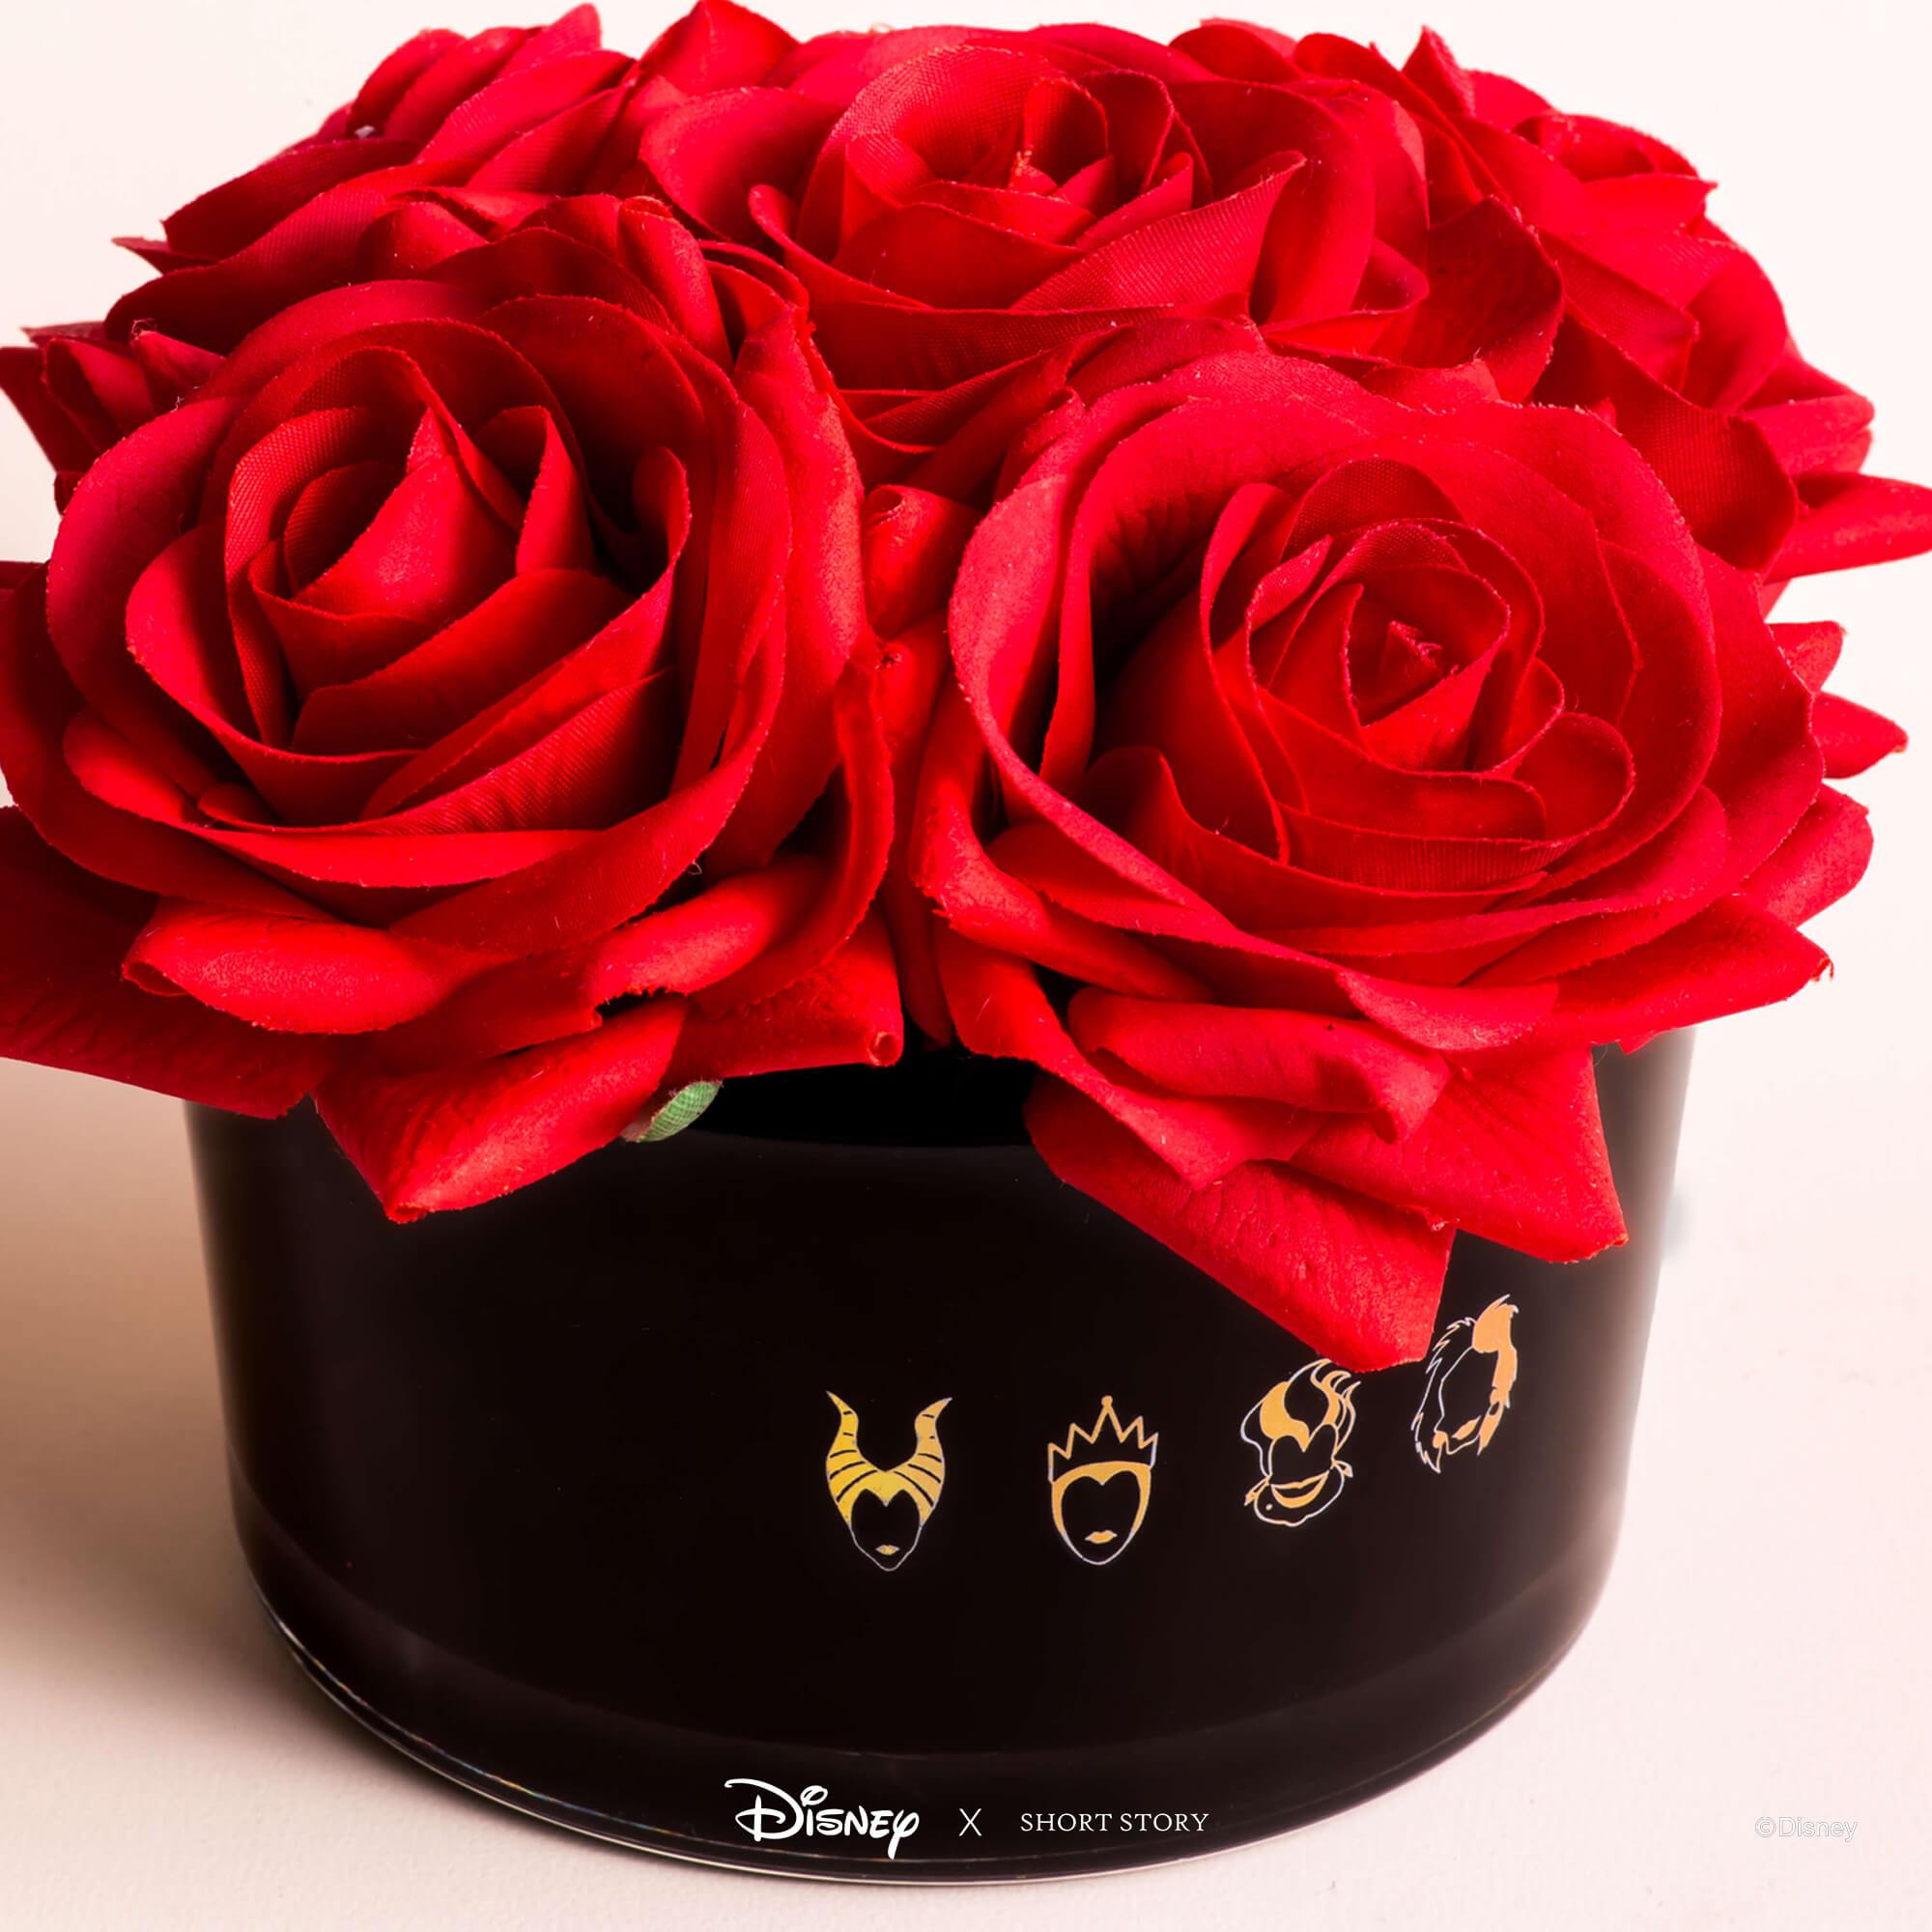 Disney Floral Bouquet Diffuser - Villains (Red Rose Spell)